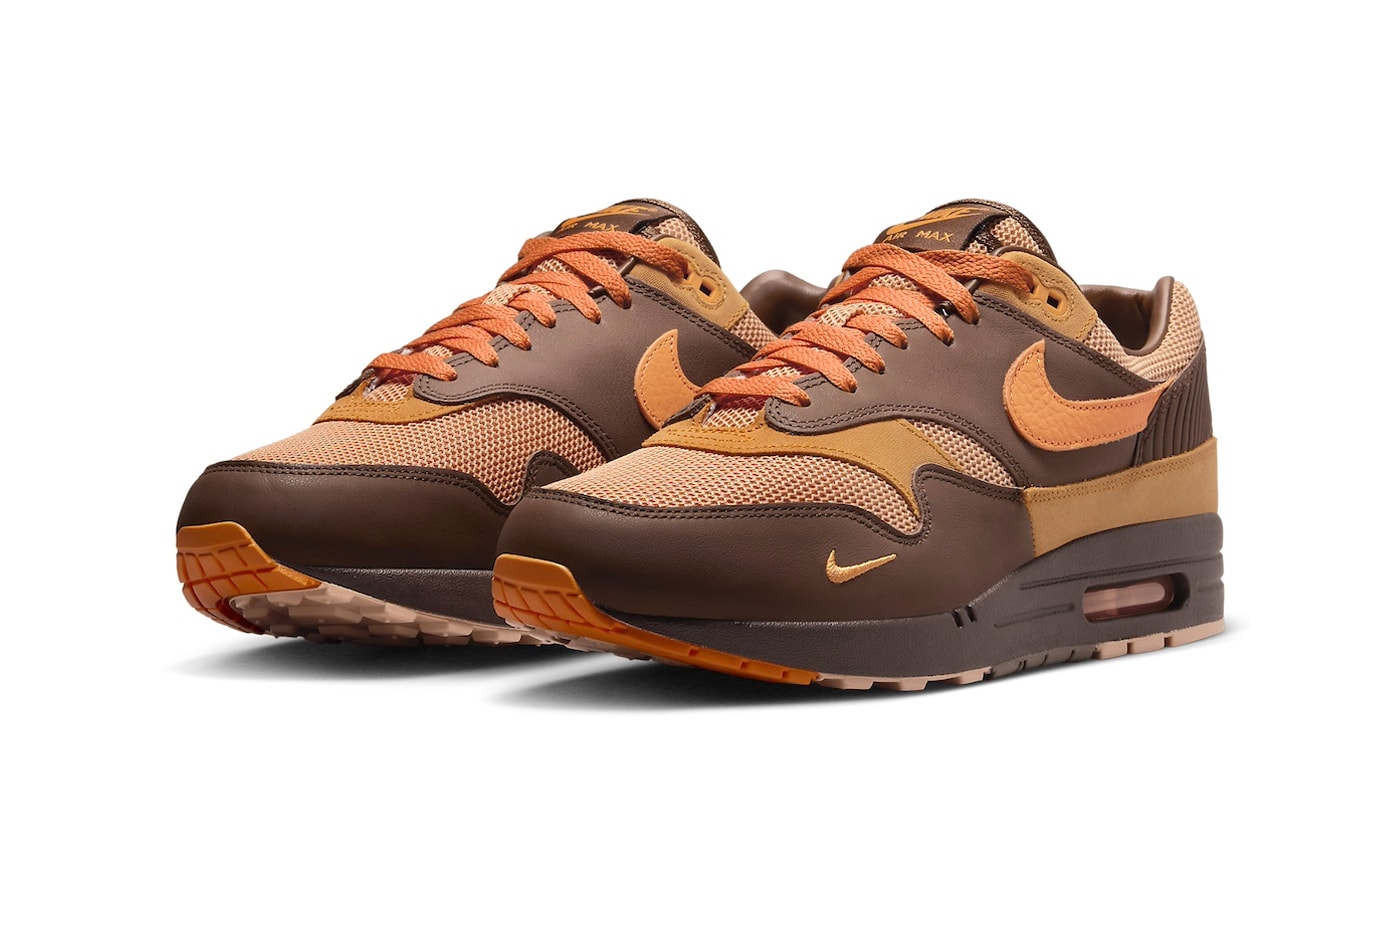 Official Look at the Nike Air Max 1 